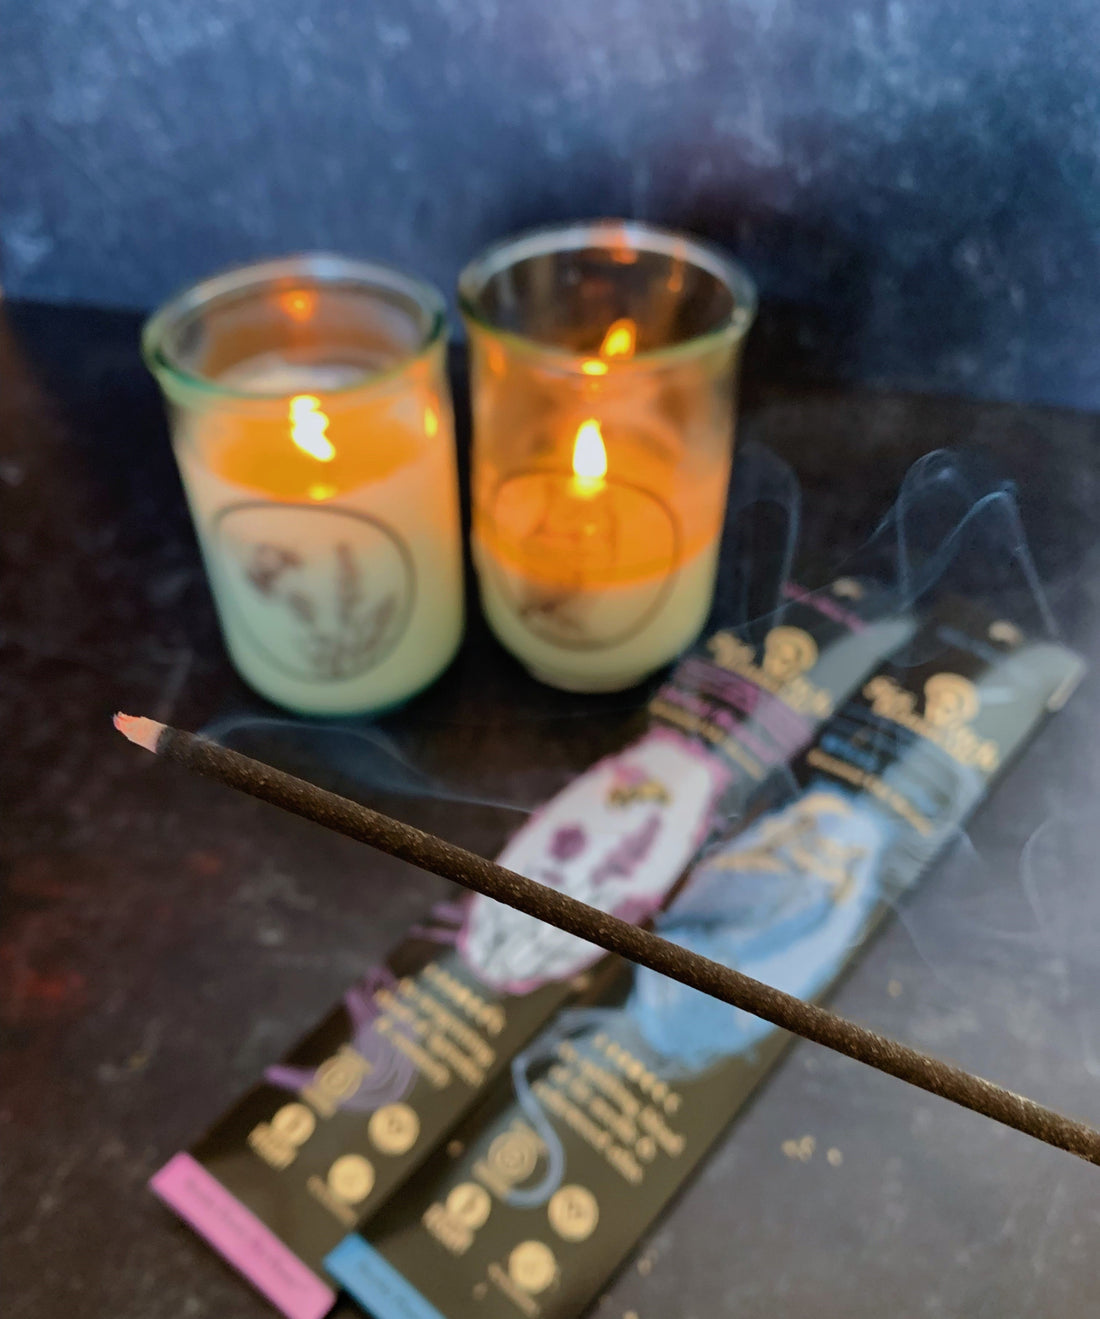 Incense stick burning in foreground, dark background with two lit candles and two packets of incense.